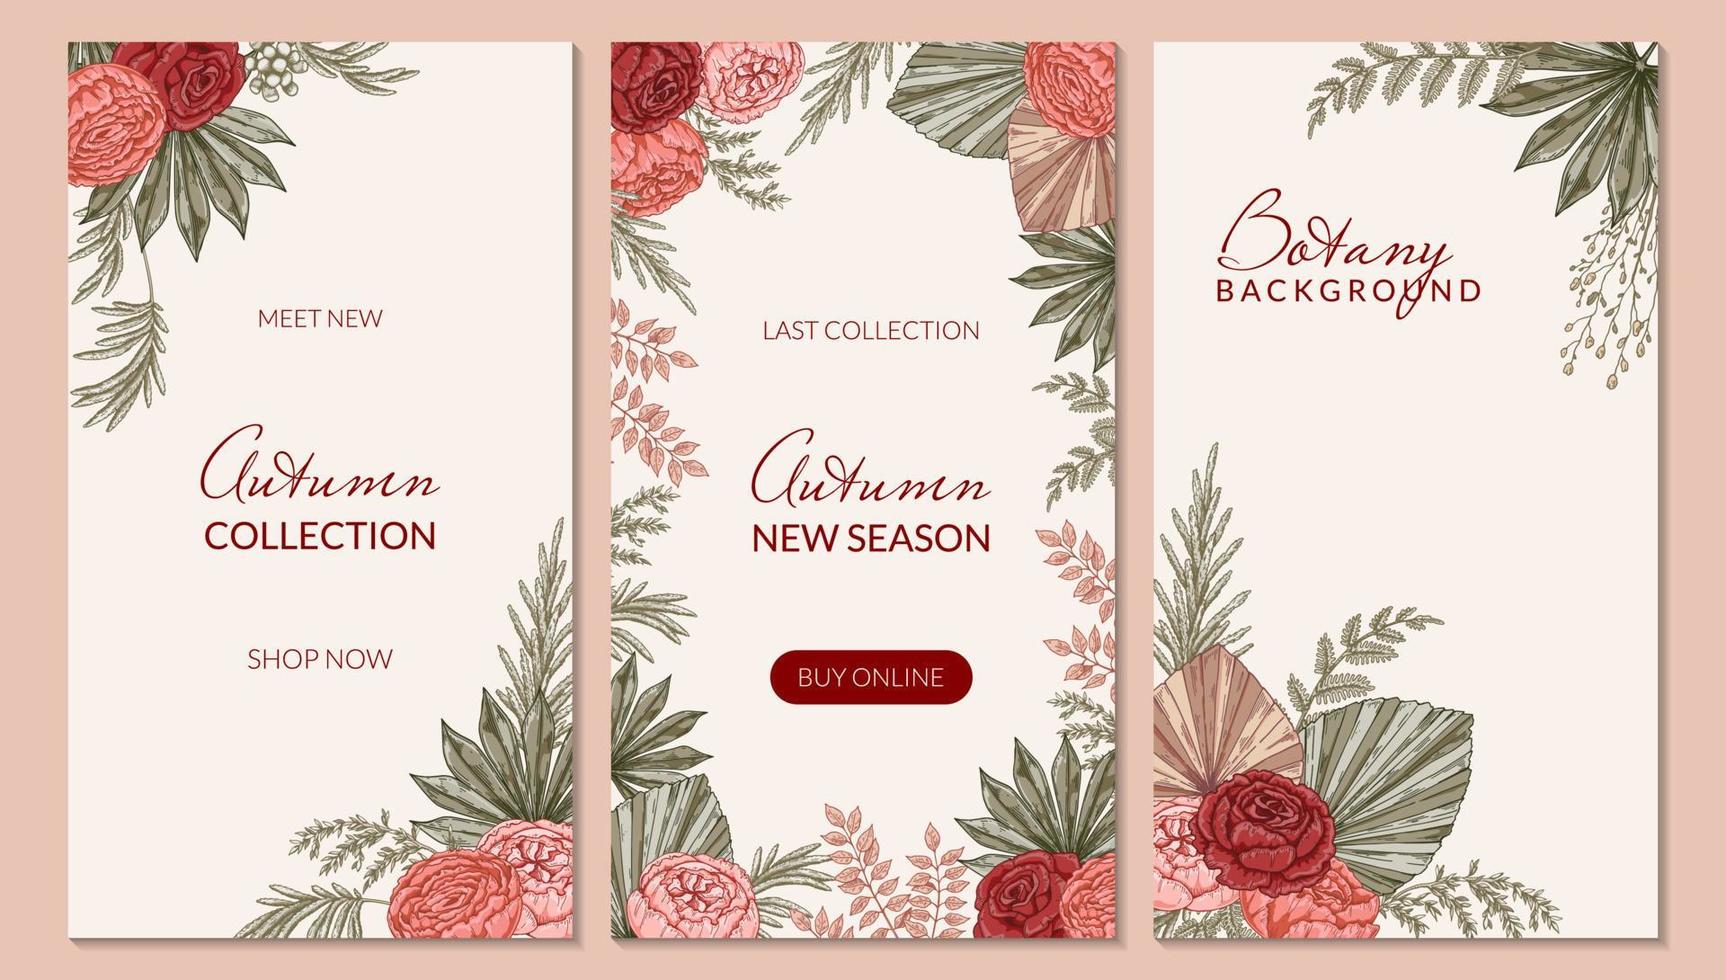 Set social media stories templates. Autumn design with hand drawn modern flower compositions. Vector illustration